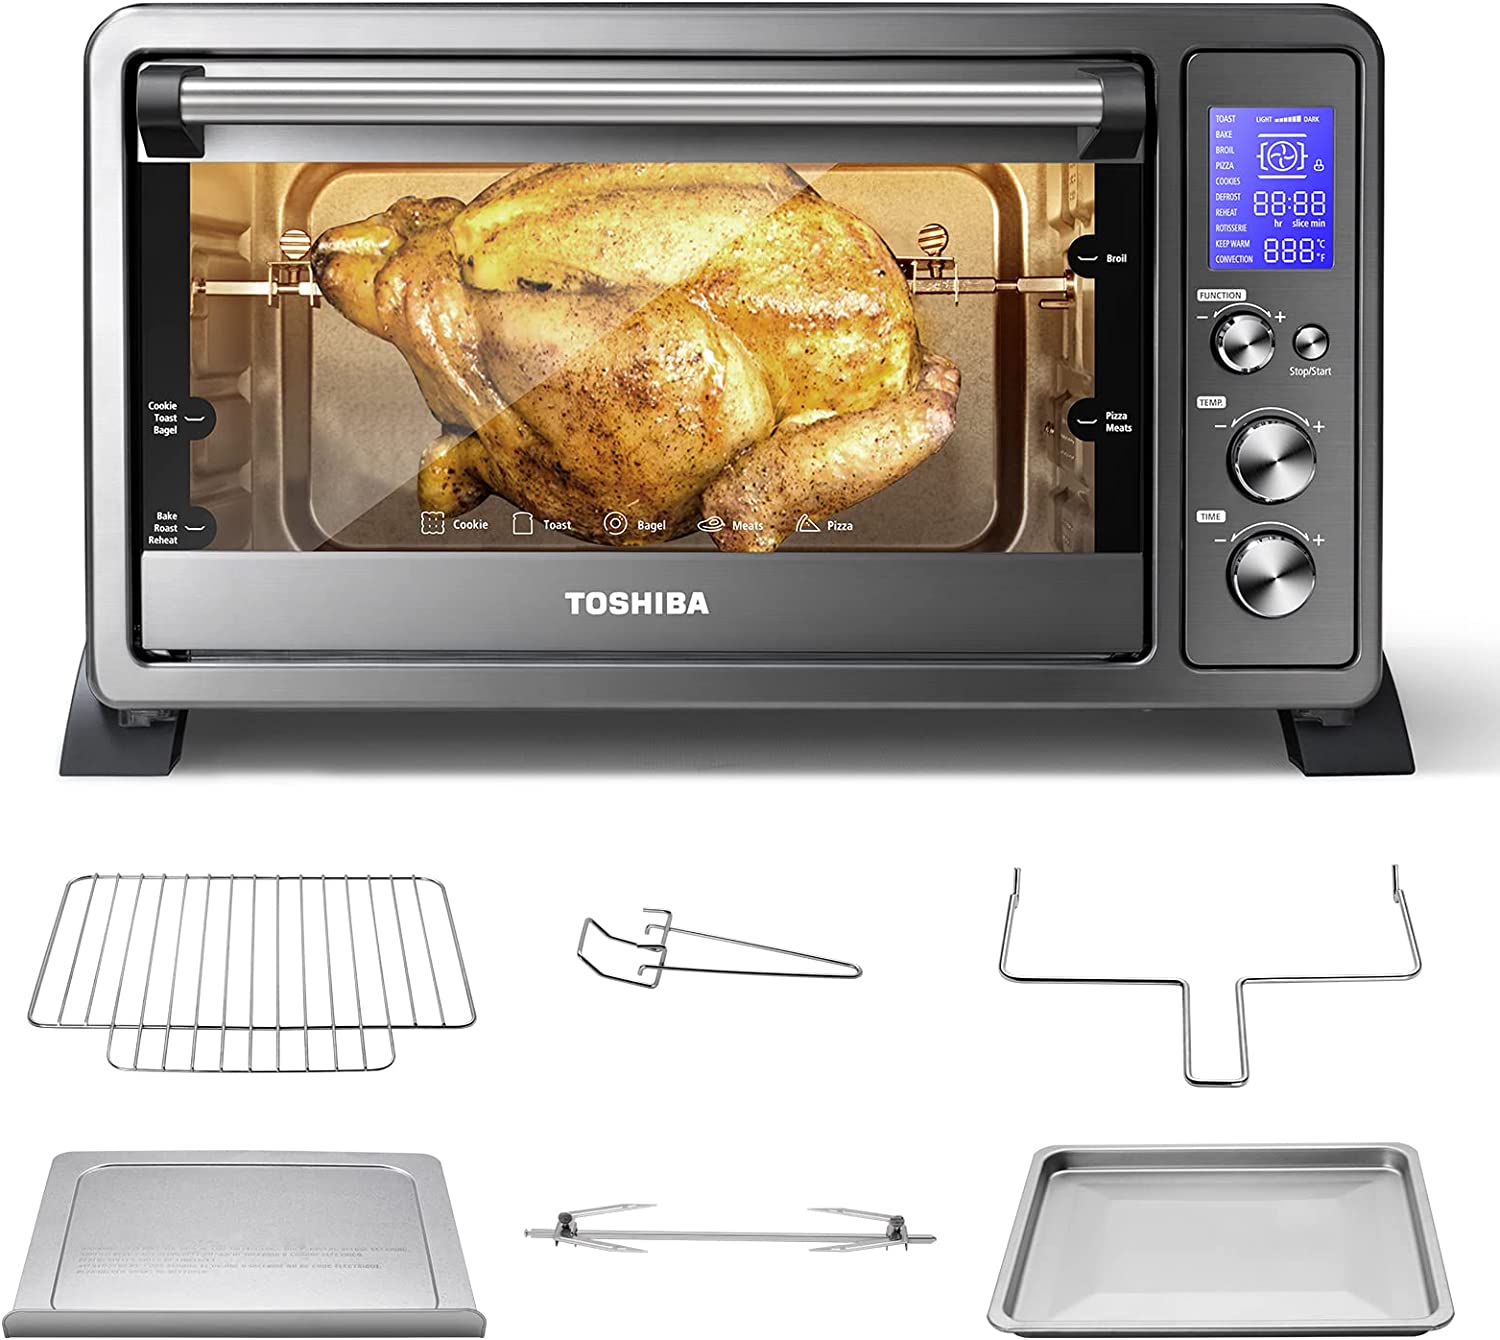 Toshiba AC25CEW-BS Digital Convection Toaster Oven